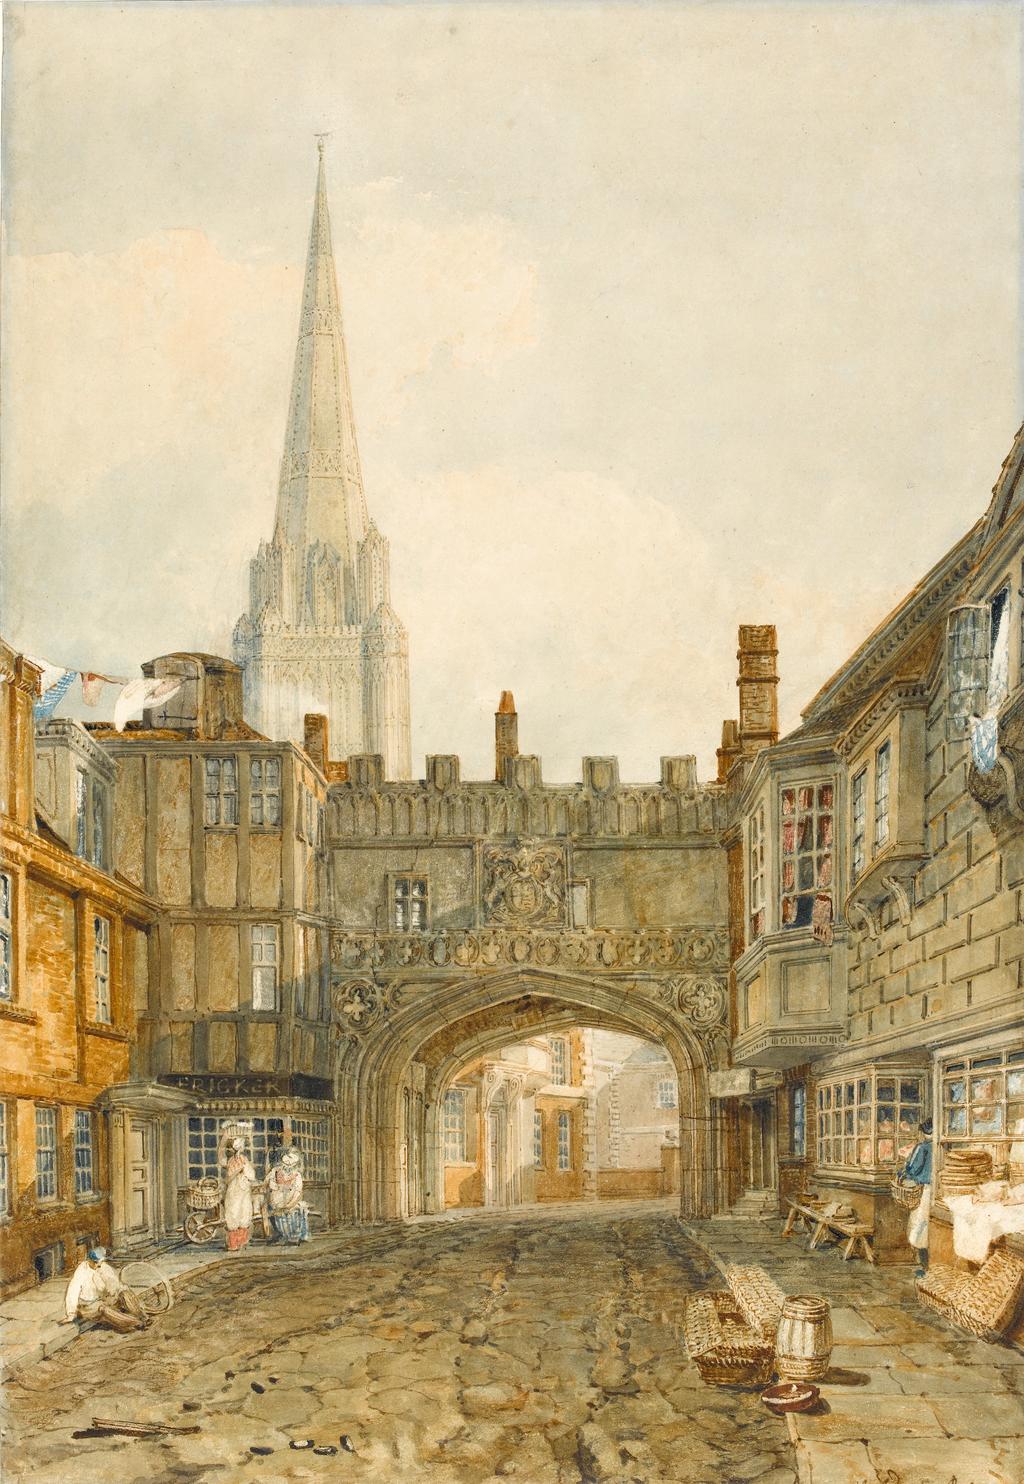 An image of Gateway to the Close, Salisbury. Turner, Joseph Mallord William (British, 1775-1851). Watercolour over graphite with gum arabic on paper, height 456 mm, width 315 mm, 1802.